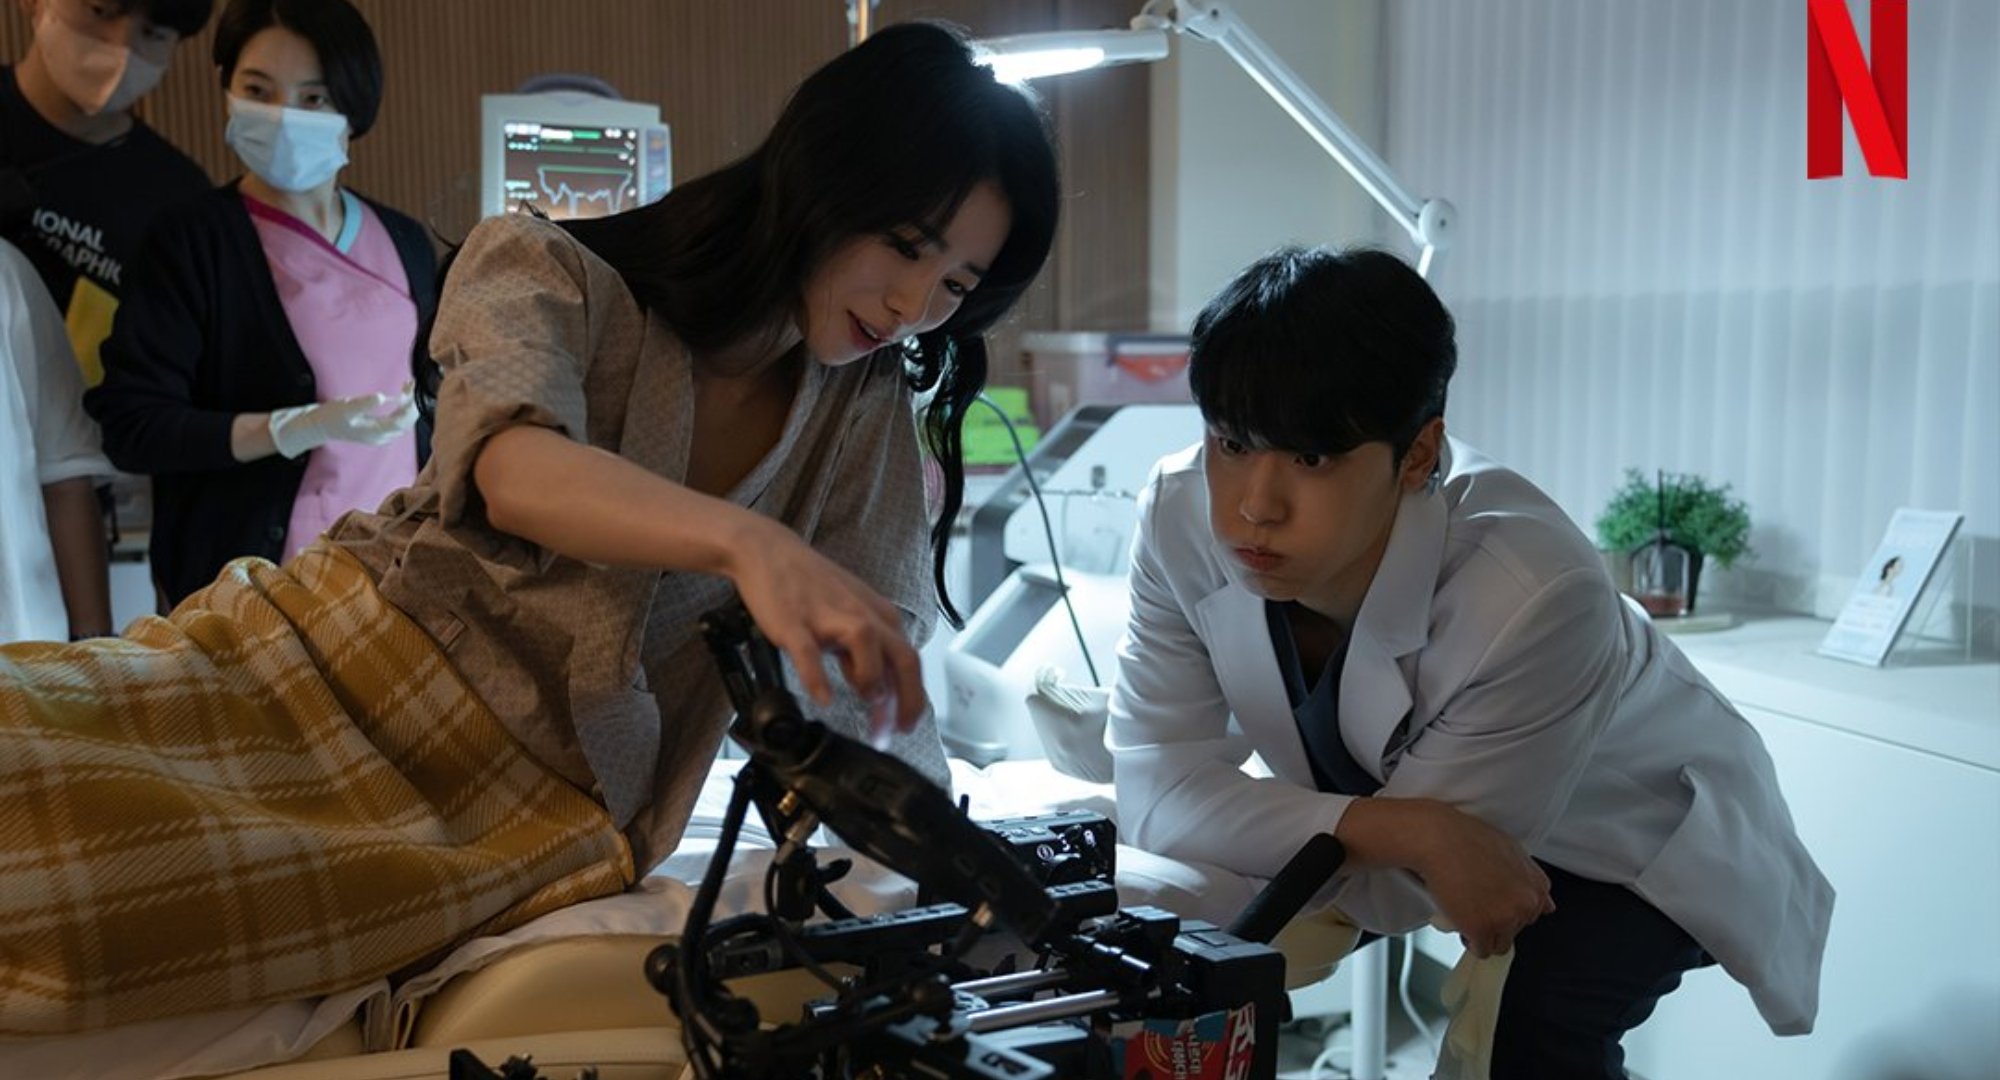 ‘The Glory’ Part 2: Why Lee Do-hyun Got Scared Filming a Scene With 2 Female Co-Stars